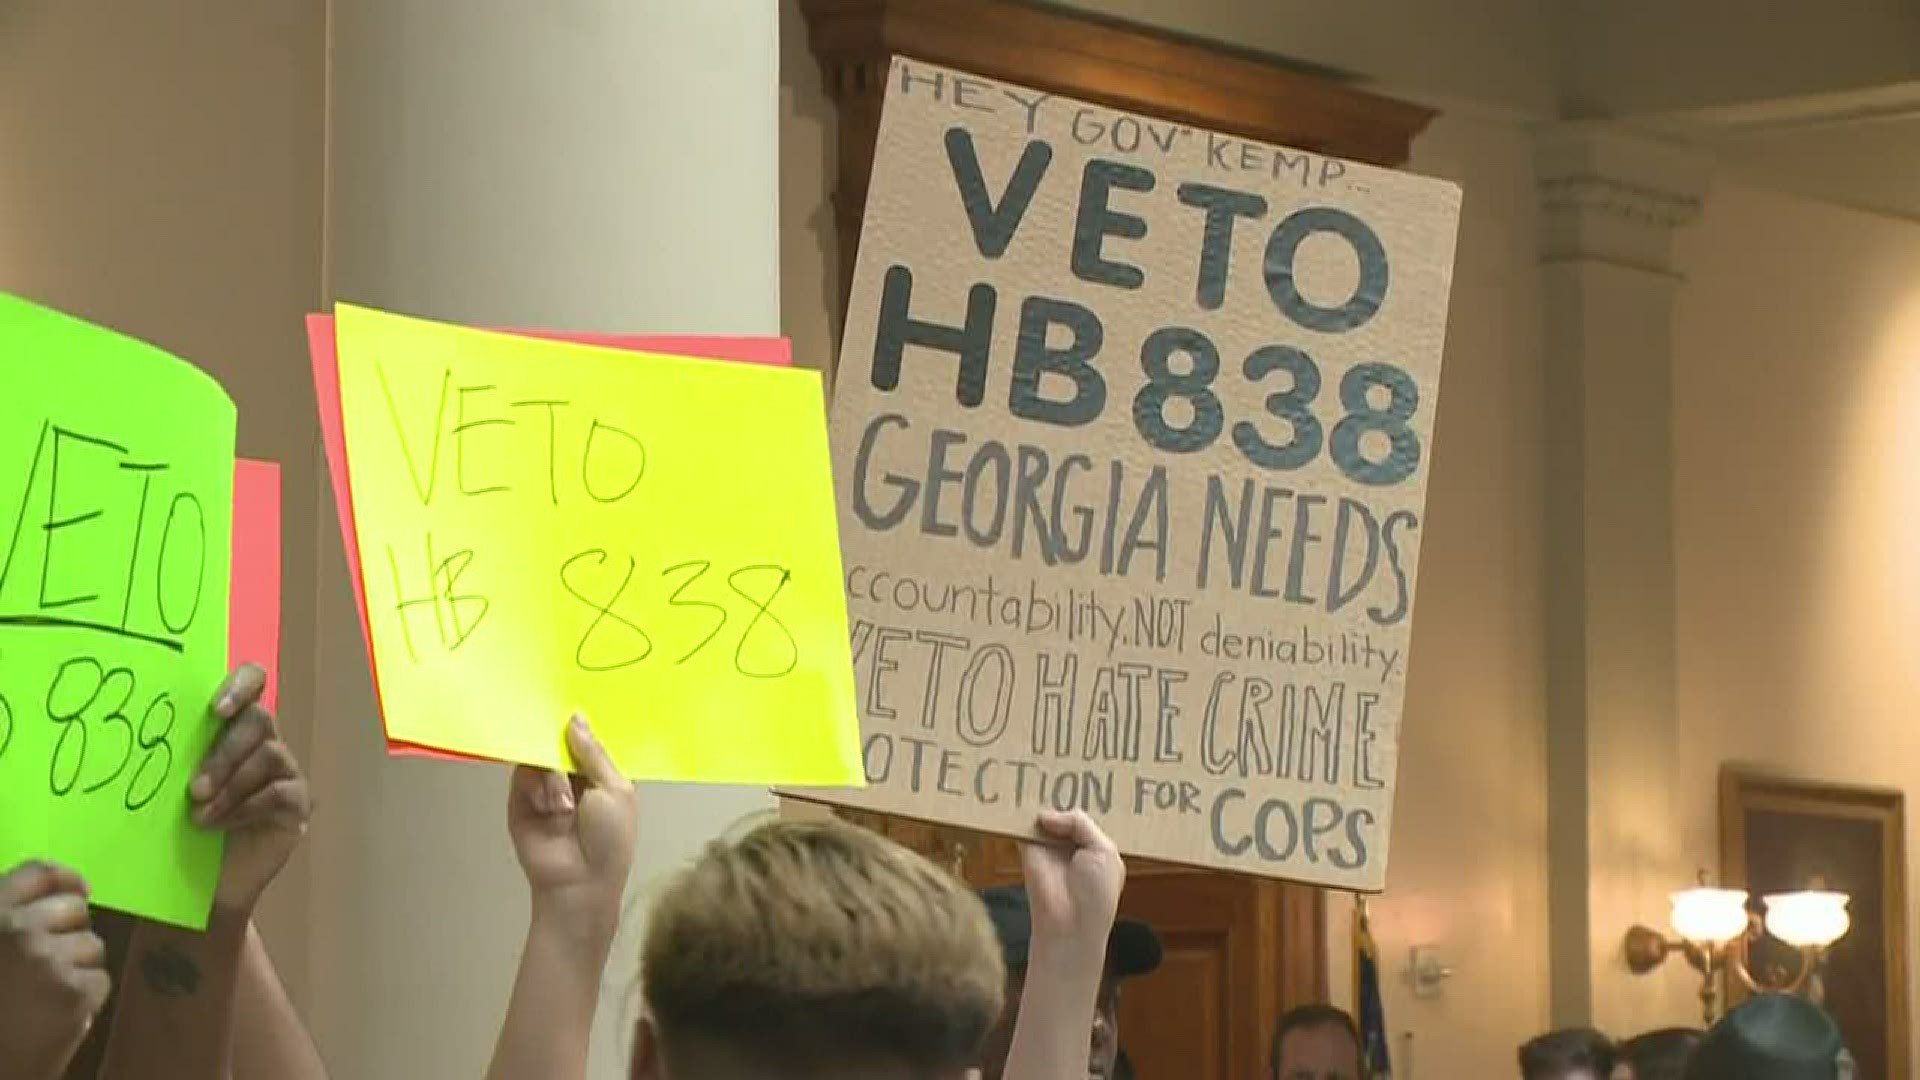 The demonstrators held signs and called for the governor to "do the right thing" on a separate bill, within moments of signing the hate crime legislation into law.